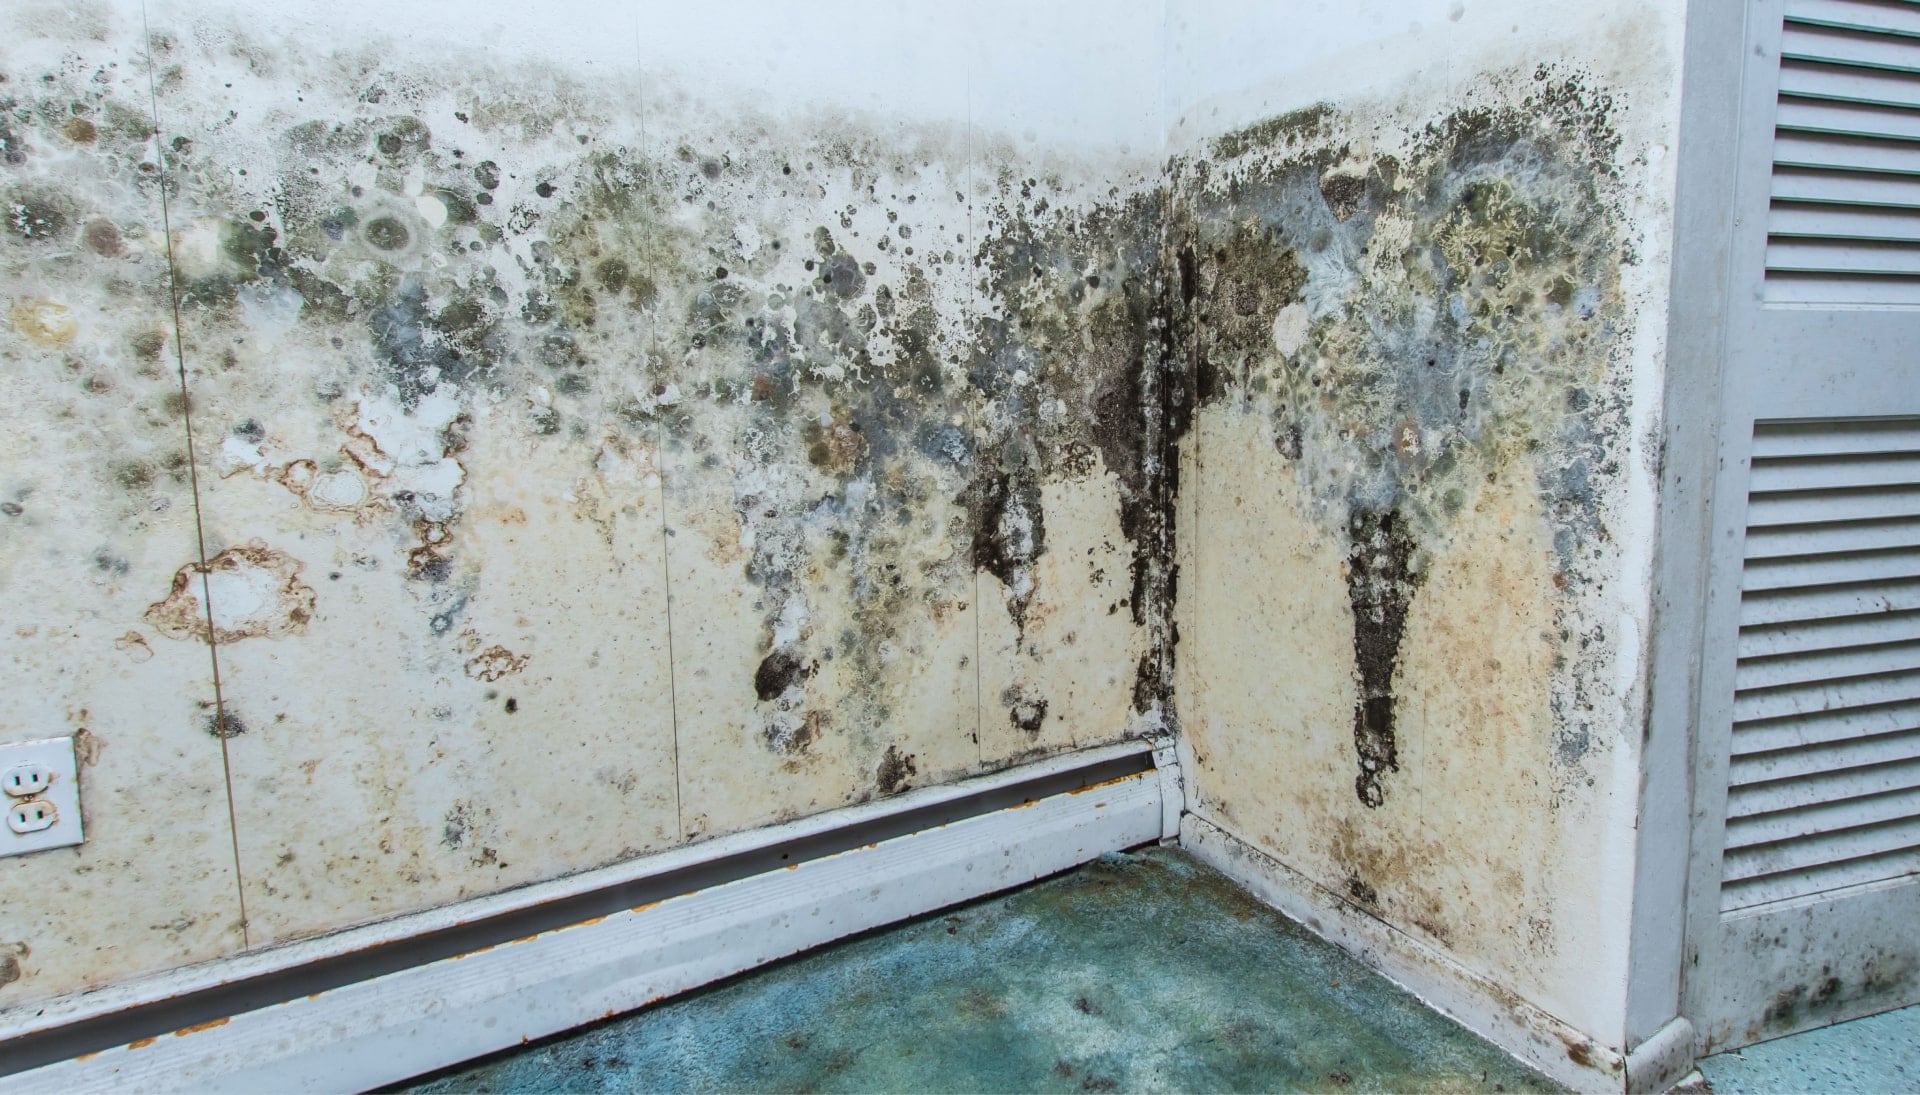 Professional mold removal, odor control, and water damage restoration service in Garland, TX.